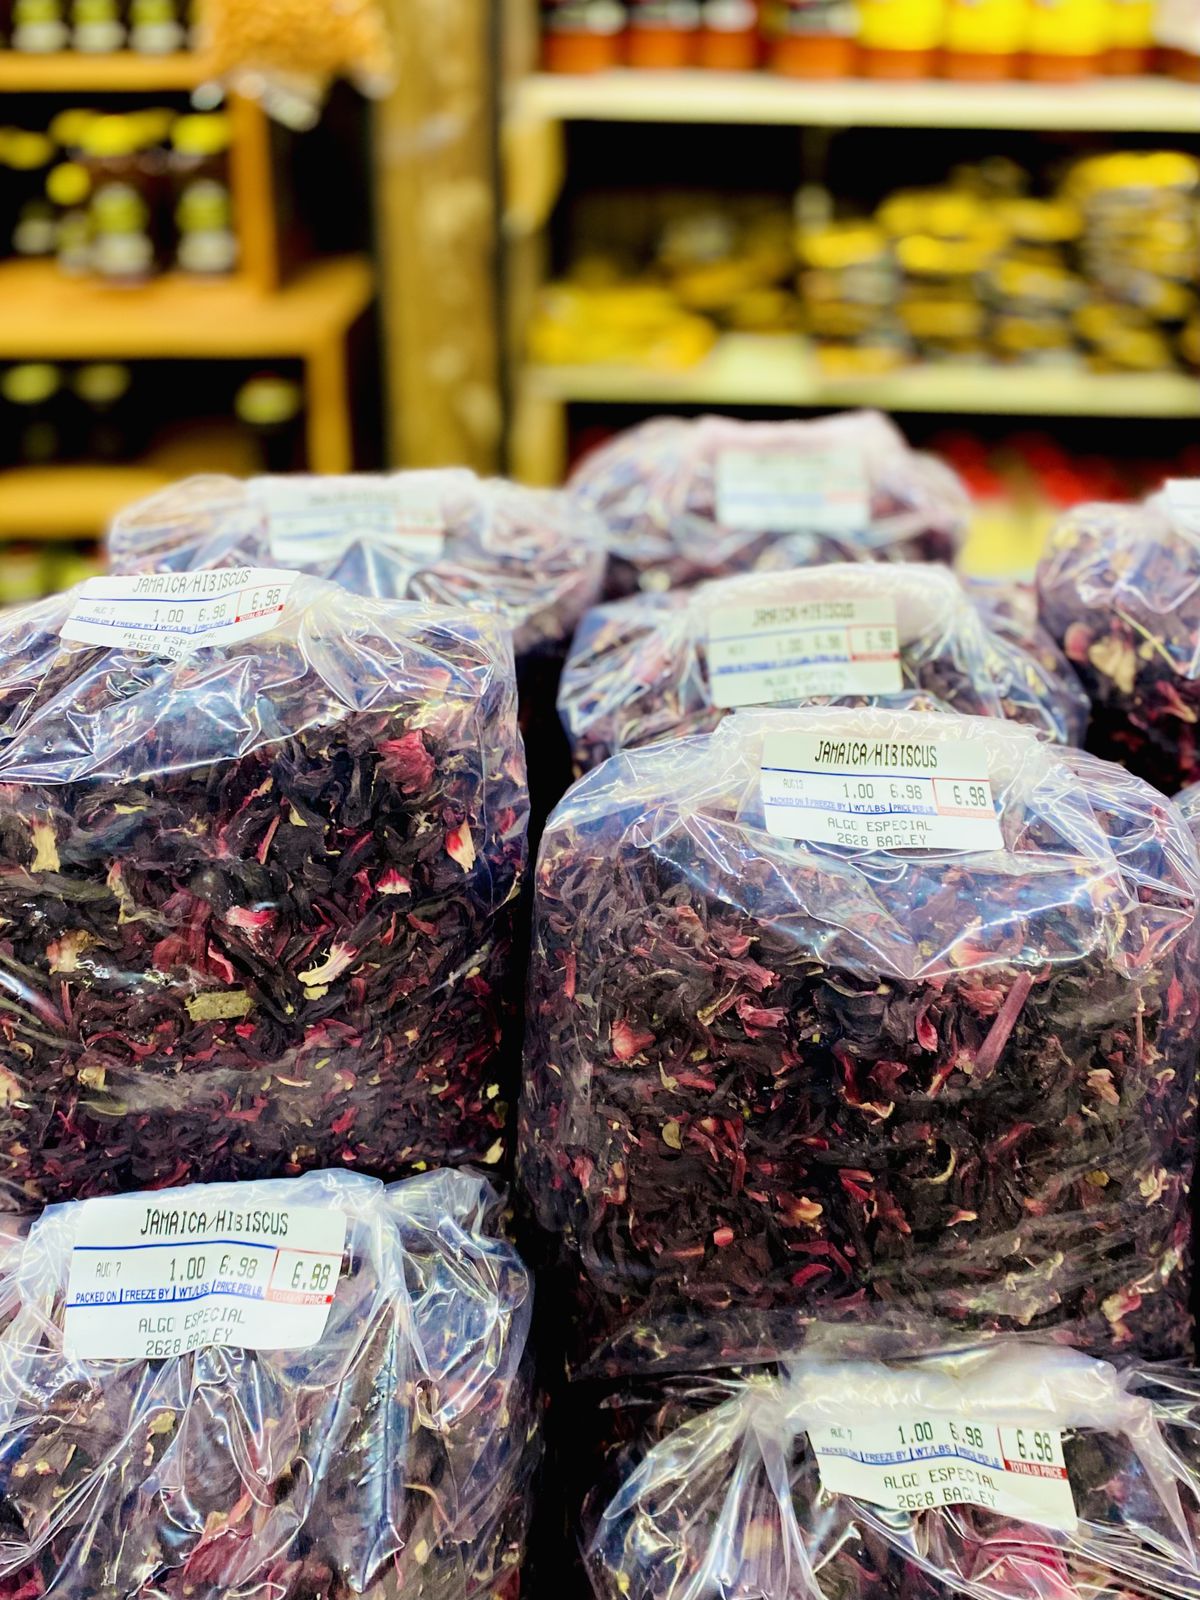 Bags of dried hibiscus flowers and shelves of other grocery items in the background from Algo Especial Supermercado at 2628 Bagley St. in Detroit, Michigan.